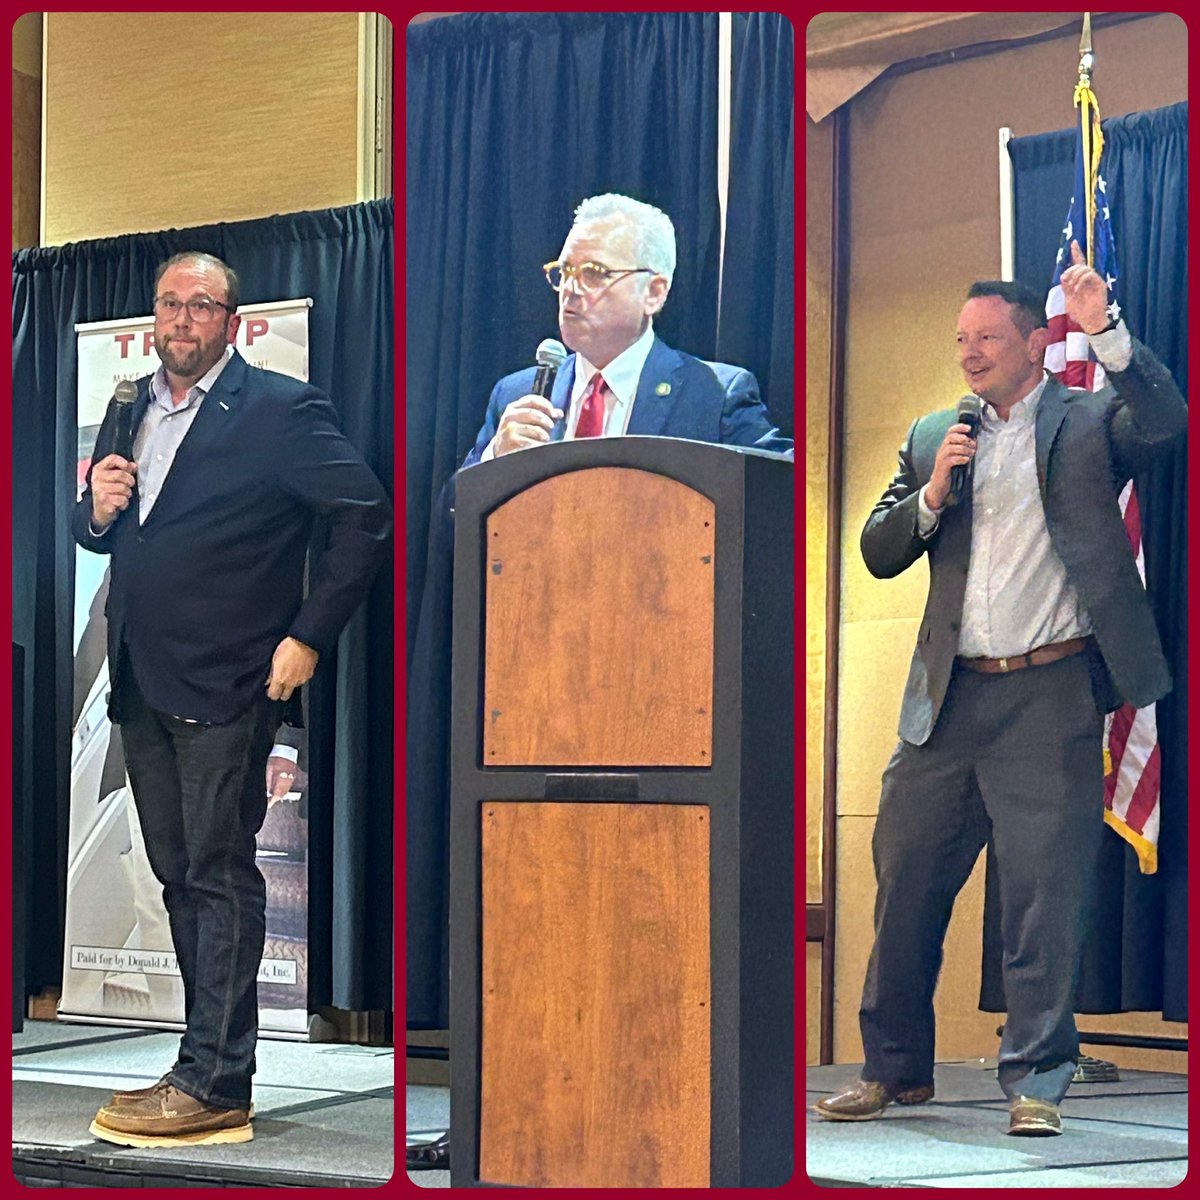 So happy to host the @mogop State Convention in the 7th Congressional District with the best! @RepJasonSmith @RepMarkAlford @RepEricBurlison  Each man sharing tremendous reasons why we will work united to take back DC in November! Thank you! #leadright #Election2024 #winred